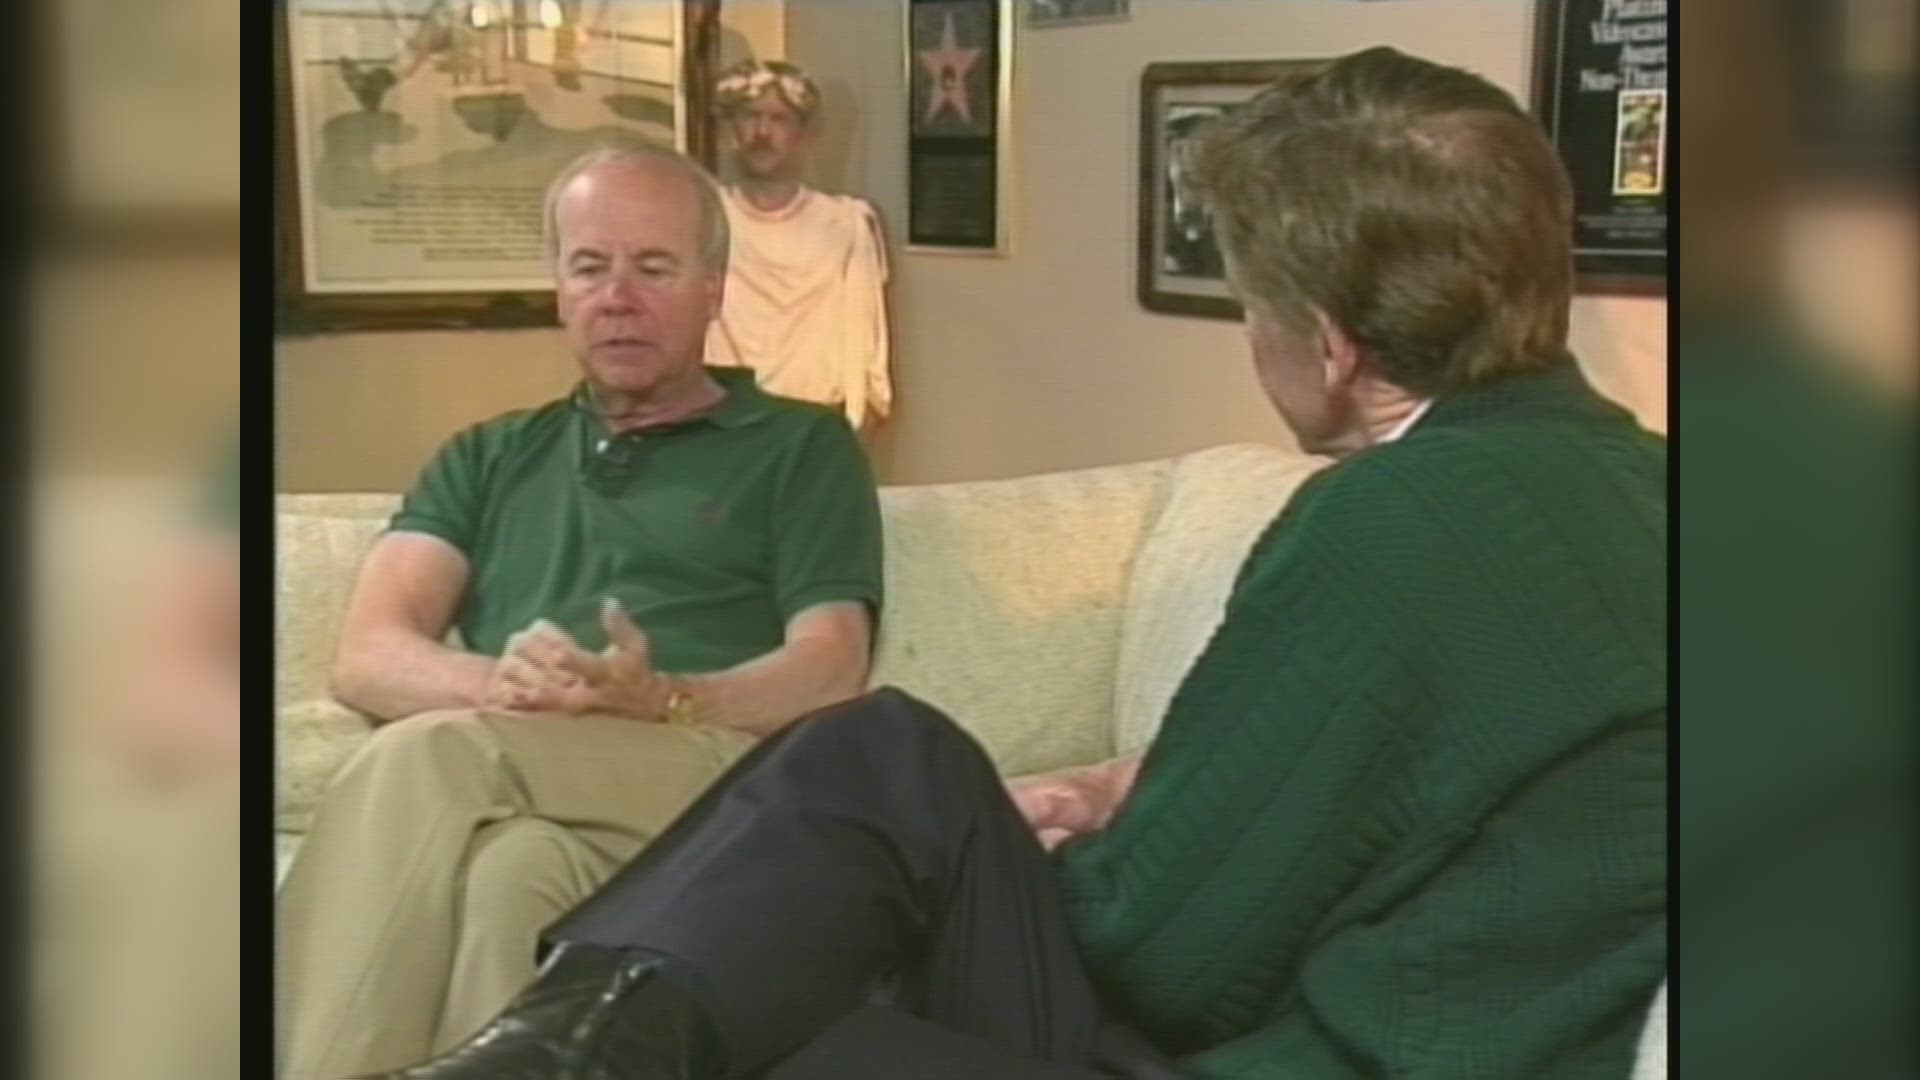 Legendary actor and comedian Tim Conway passed away Tuesday at the age of 85. In this clip from a 1993 WKYC interview, the Chagrin Falls native spoke with Jeff Maynor about how he got started in Cleveland television.